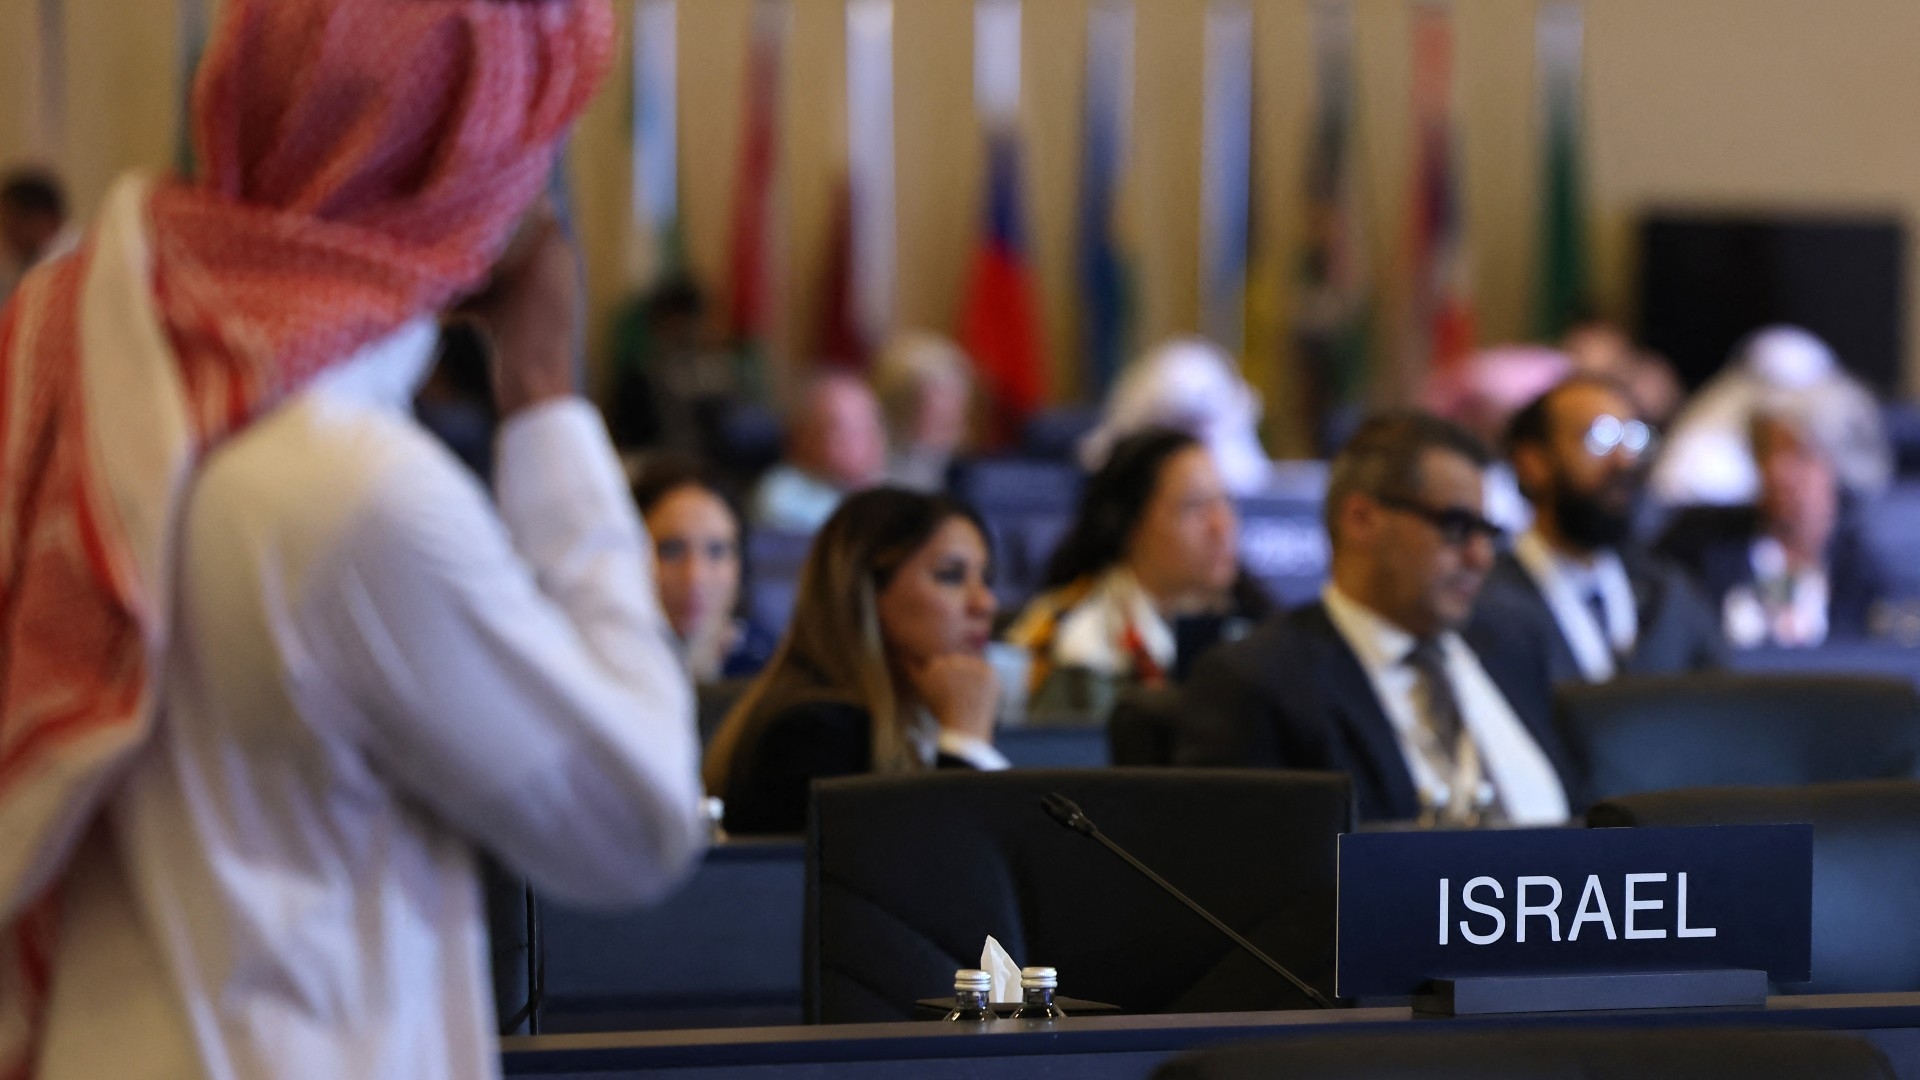 A plaque used to reserve the seat of the delegation from Israel, is seen during the UNESCO Extended 45th session of the World Heritage Committee in Riyadh on 11 September 2023 (AFP)